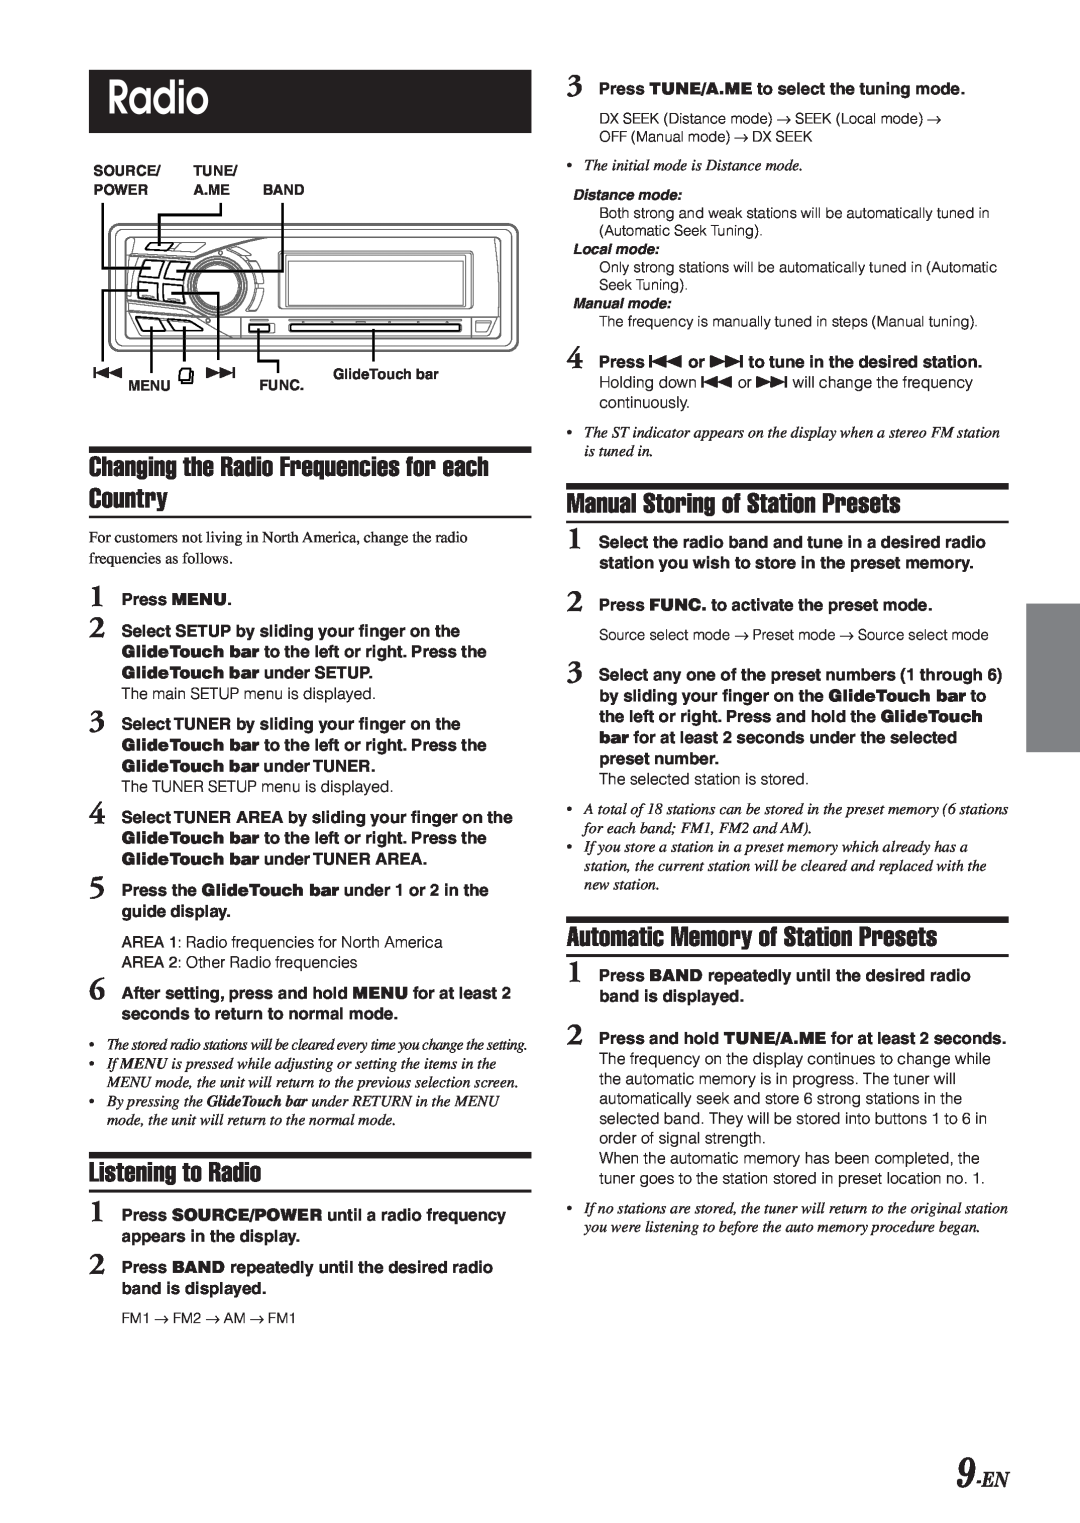 Alpine 68-04123Z09-A owner manual Changing the Radio Frequencies for each Country, Listening to Radio, 9-EN 